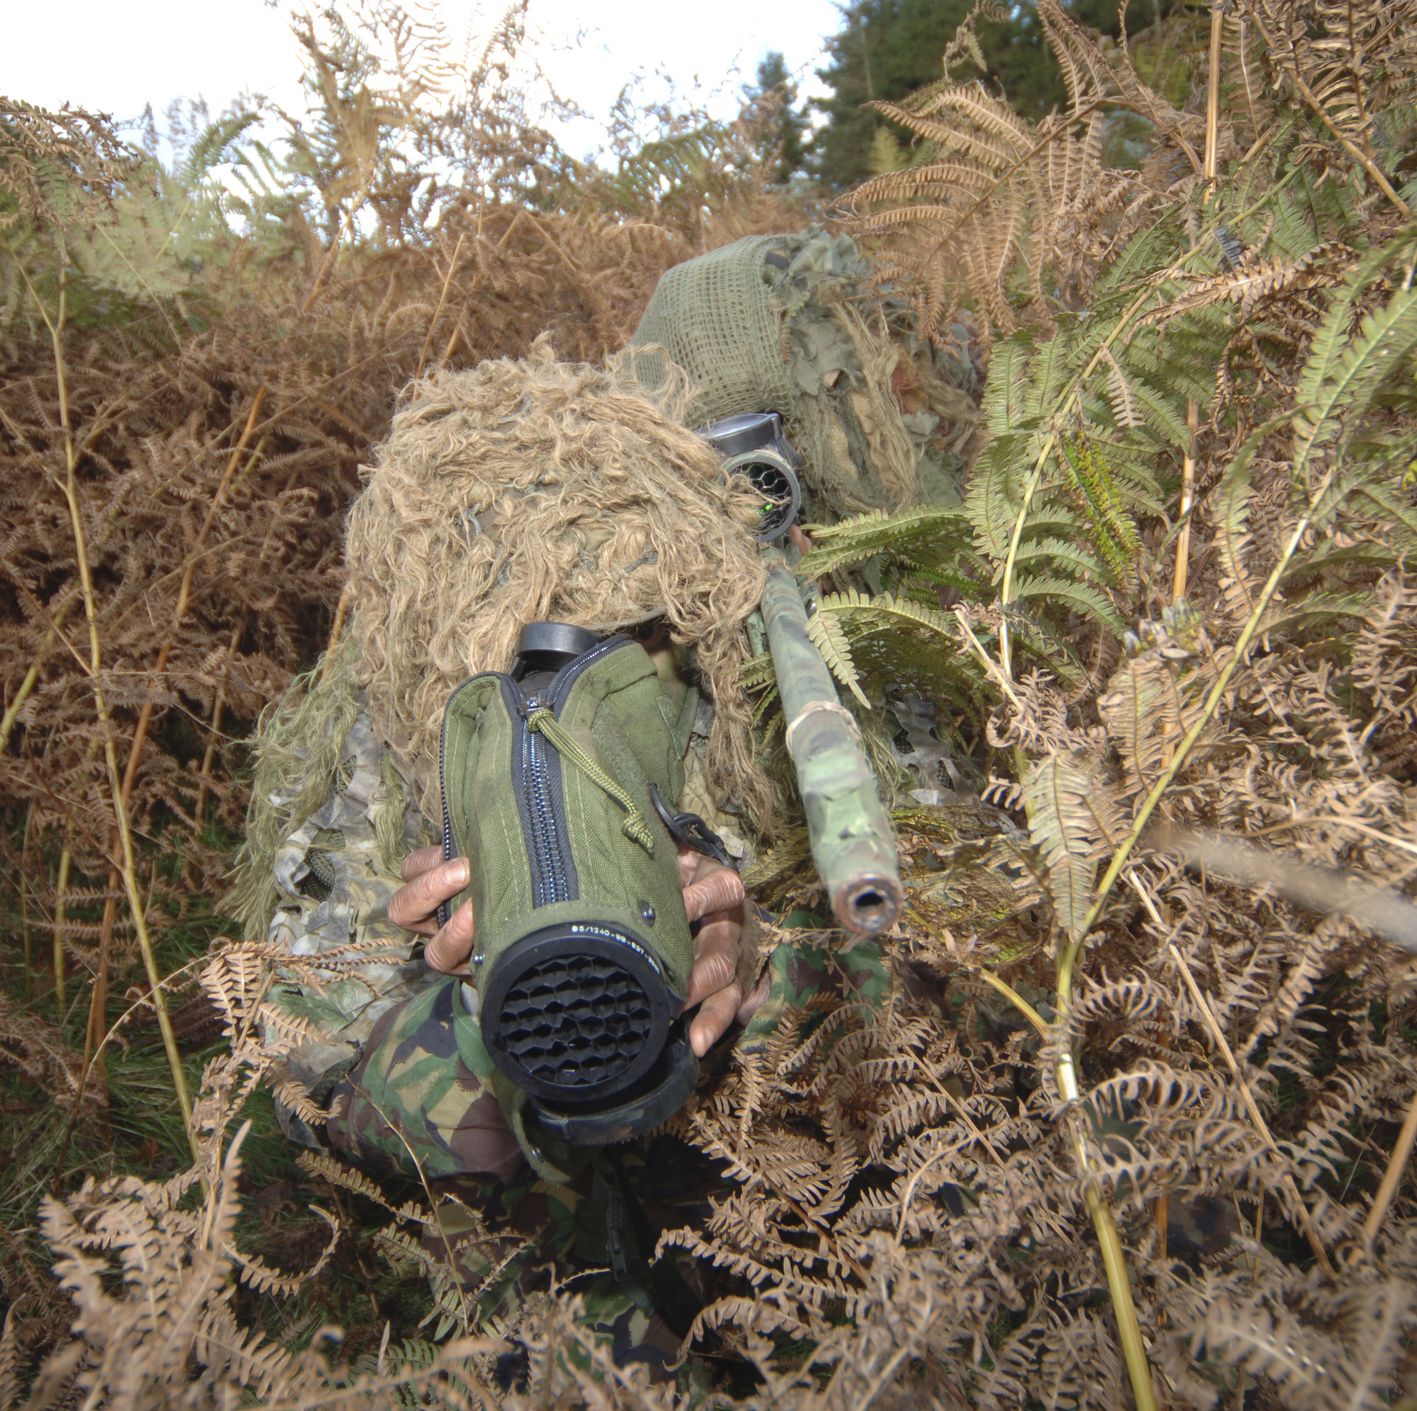 How Does Camouflage Work? A U.S. Army Sniper Course Instructor Explains the Art of Concealment